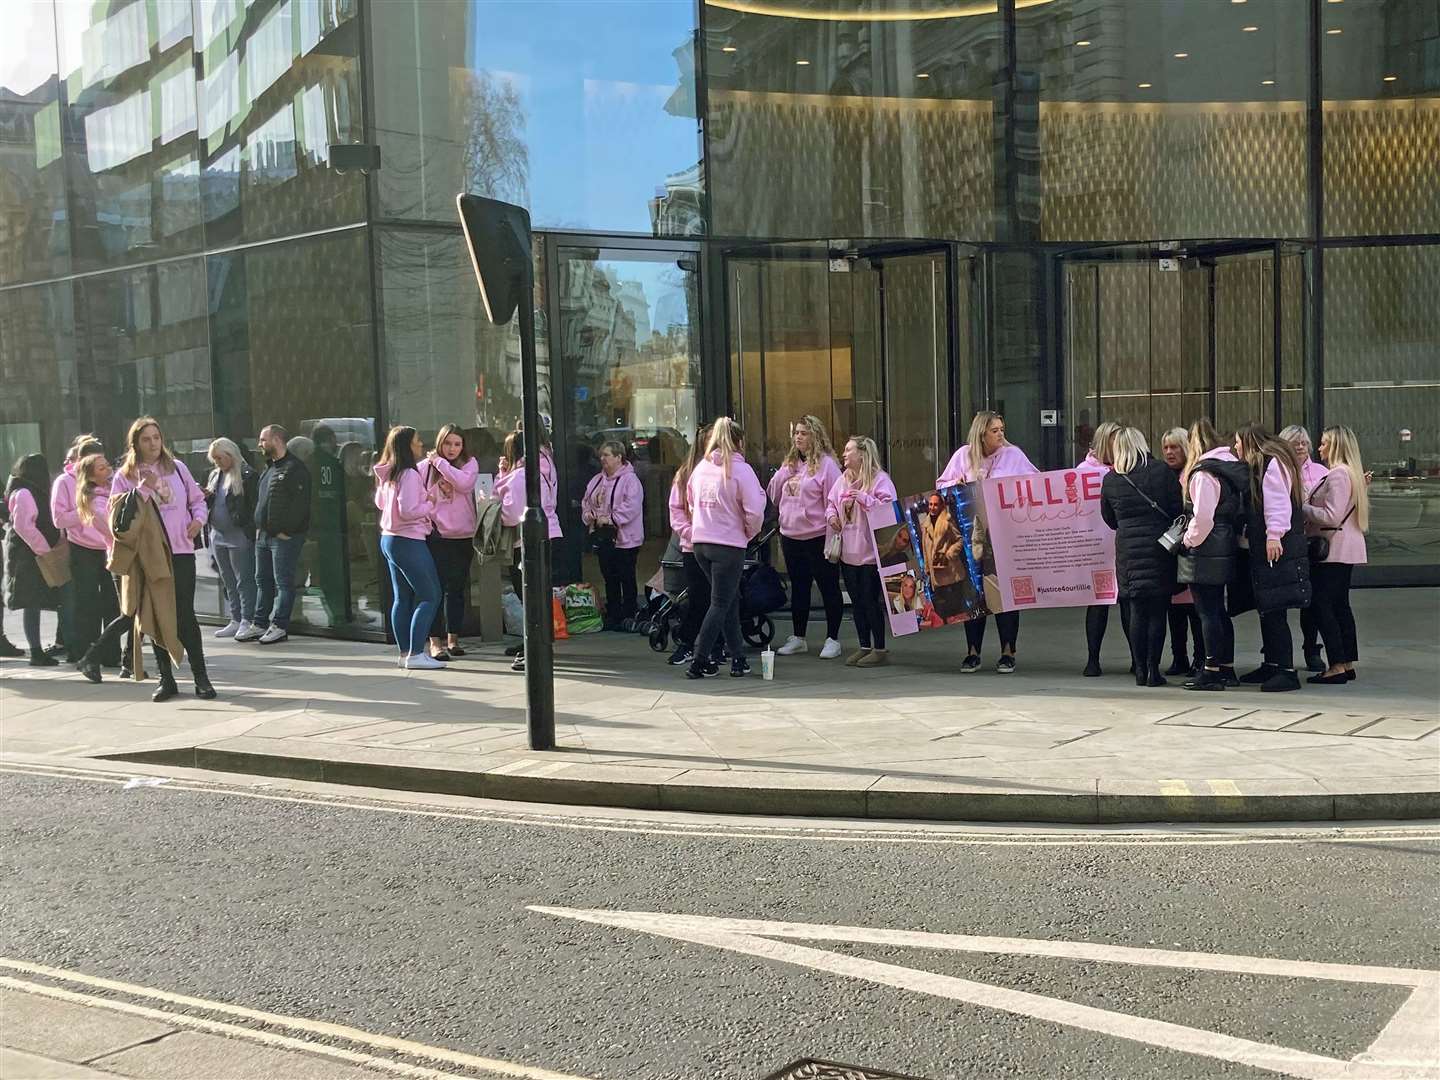 Friends and family of Lillie Clack dressed in pink during a protest outside the Old Bailey (Emily Pennink/PA)